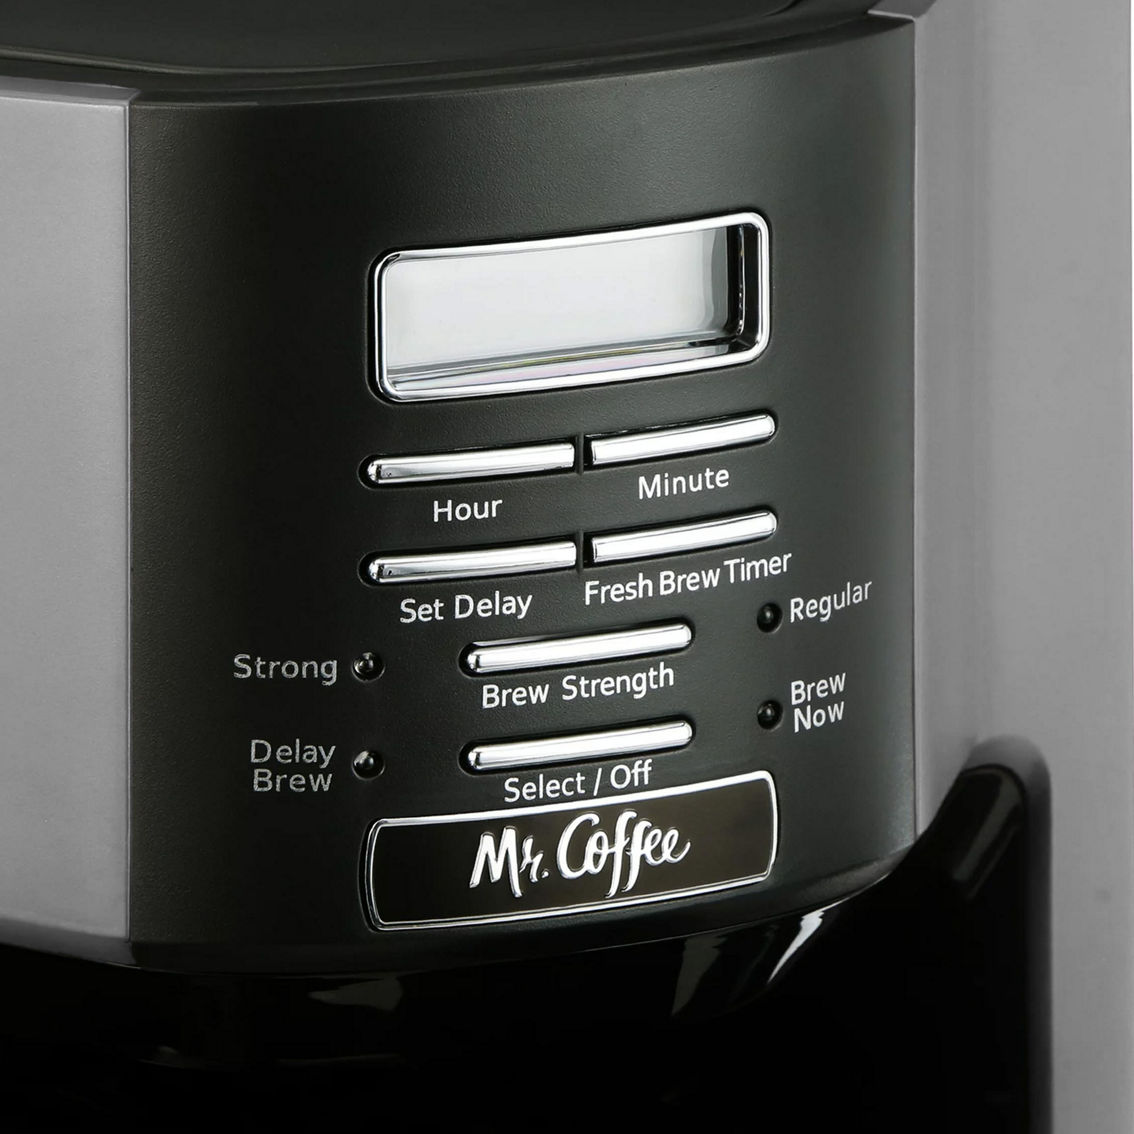 Mr. Coffee 12 Cup Programmable Coffee Maker with Rapid Brew in Silver - Image 5 of 5